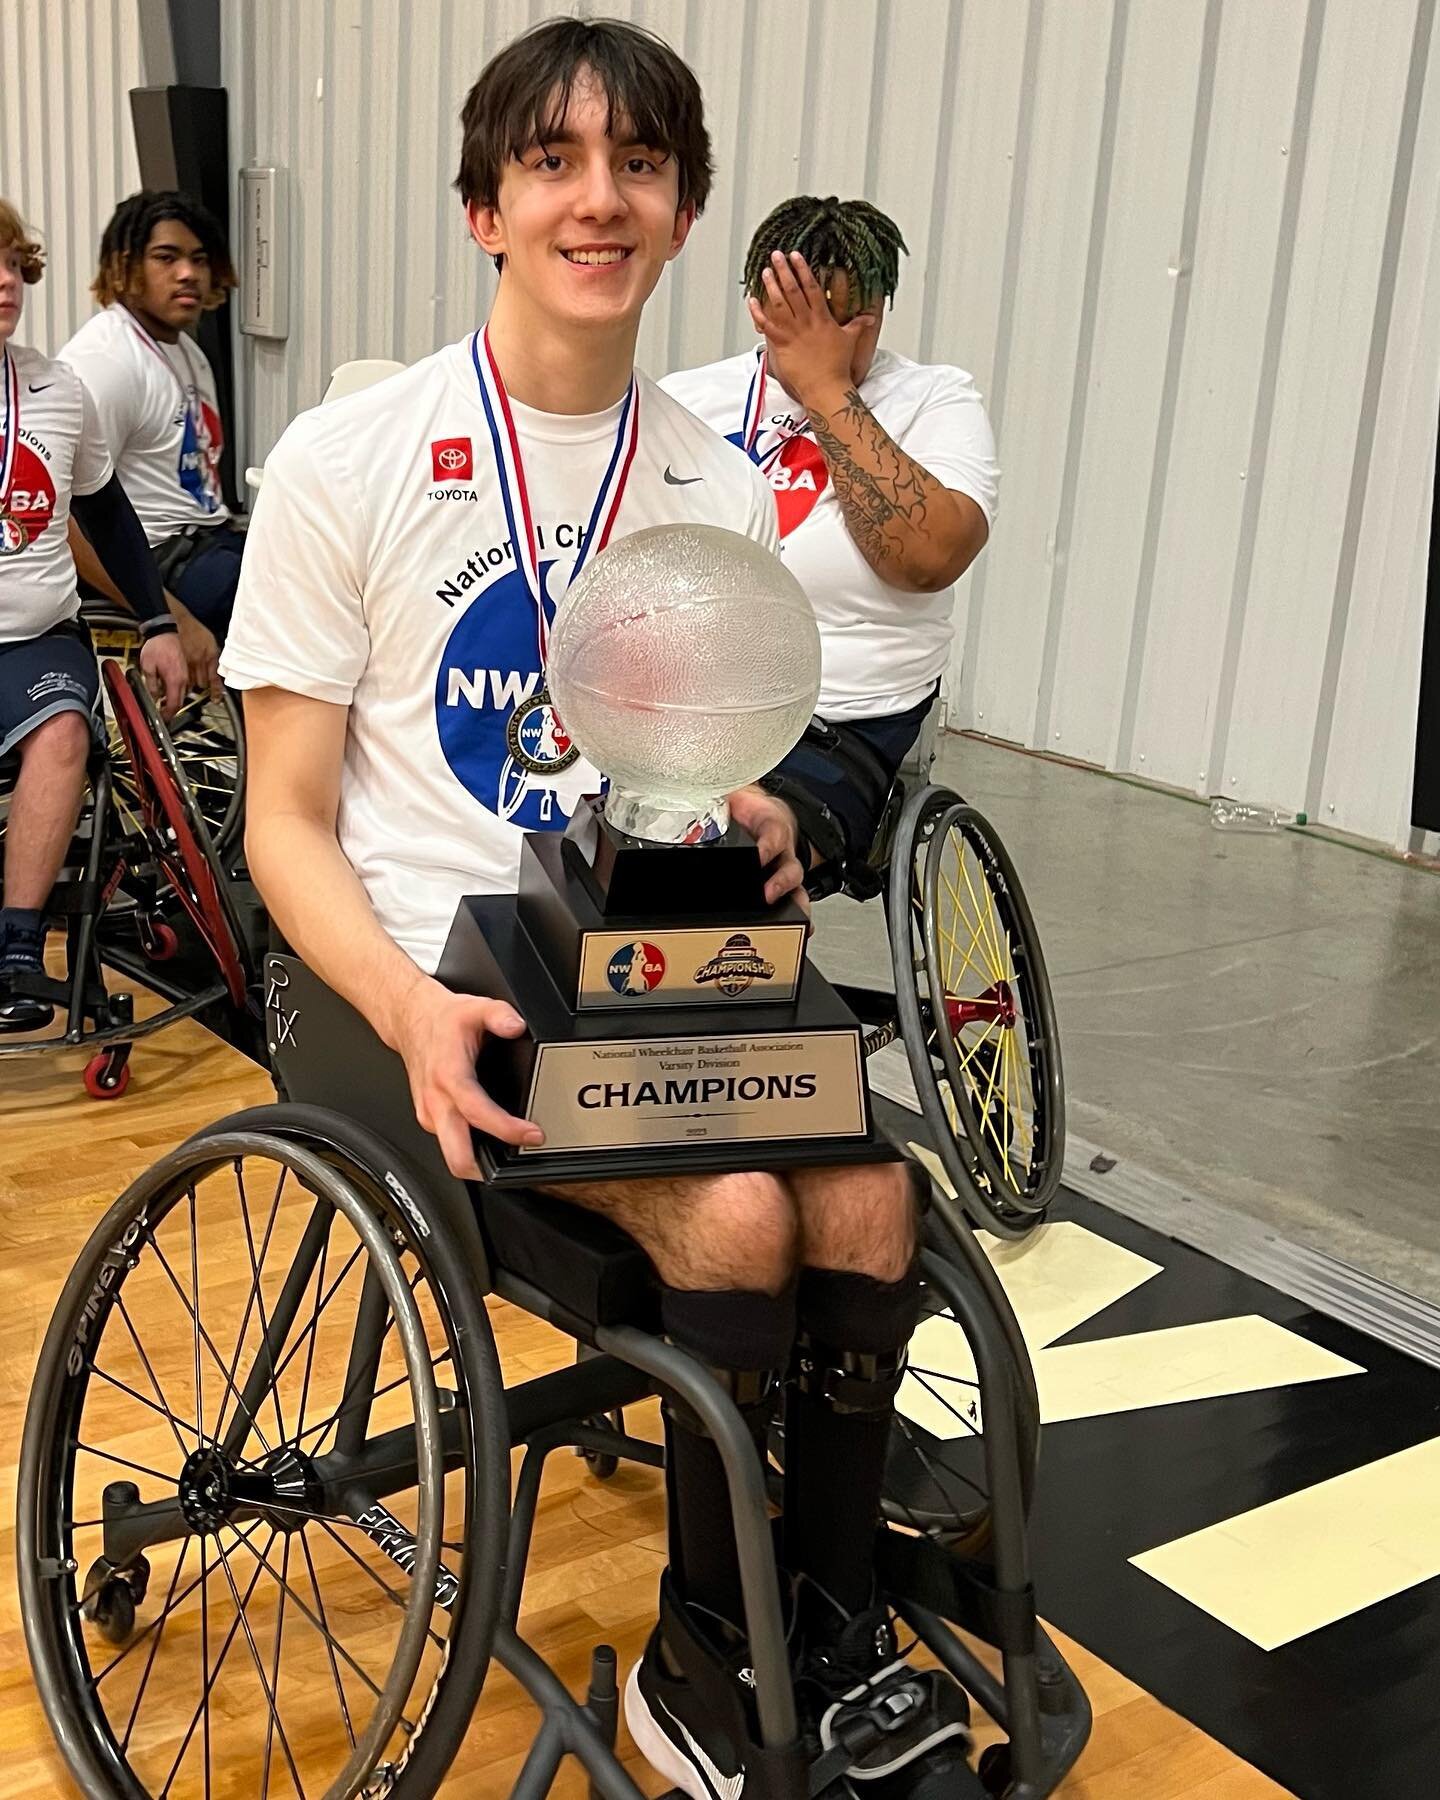 National champions!!! Sorry, but I&rsquo;m going to be an obnoxious mom and repeat that. The Lakeshore Lakers are the 2023 varsity national champions!! I am so stinking proud of these athletes. #notafoodpost #proudmom #wheelchairbasketball #lakeshore